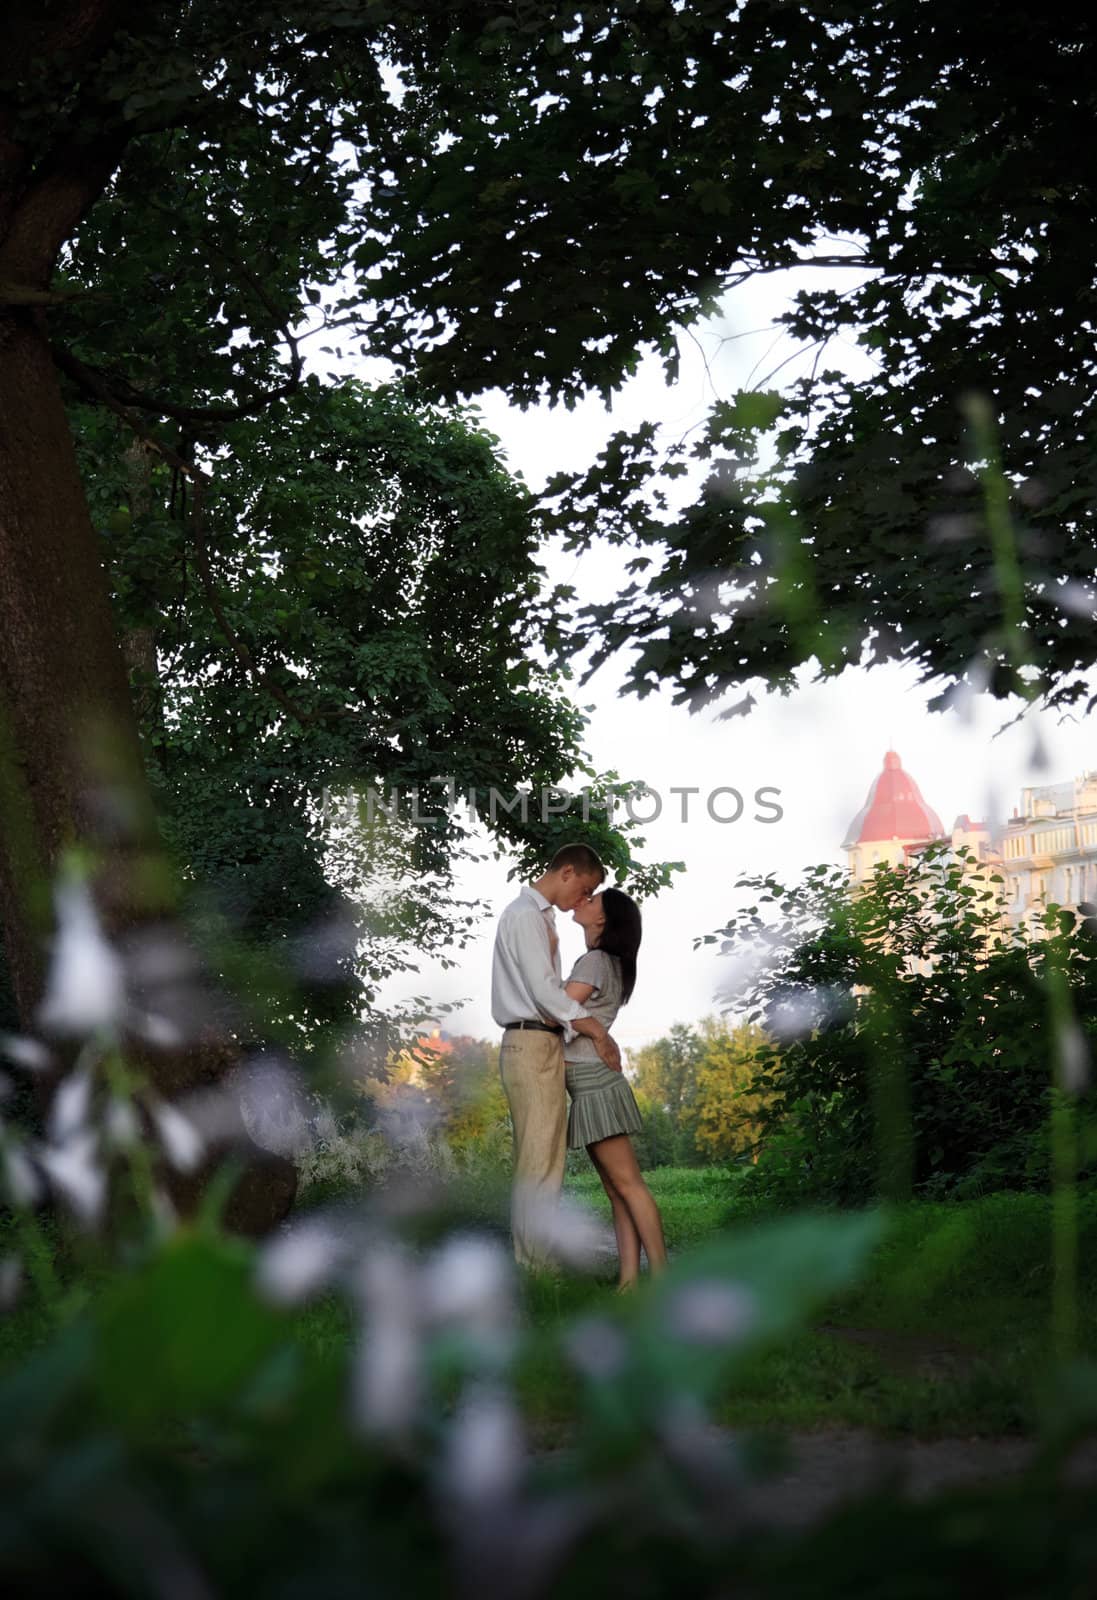 kissing couple in the park, view from branches